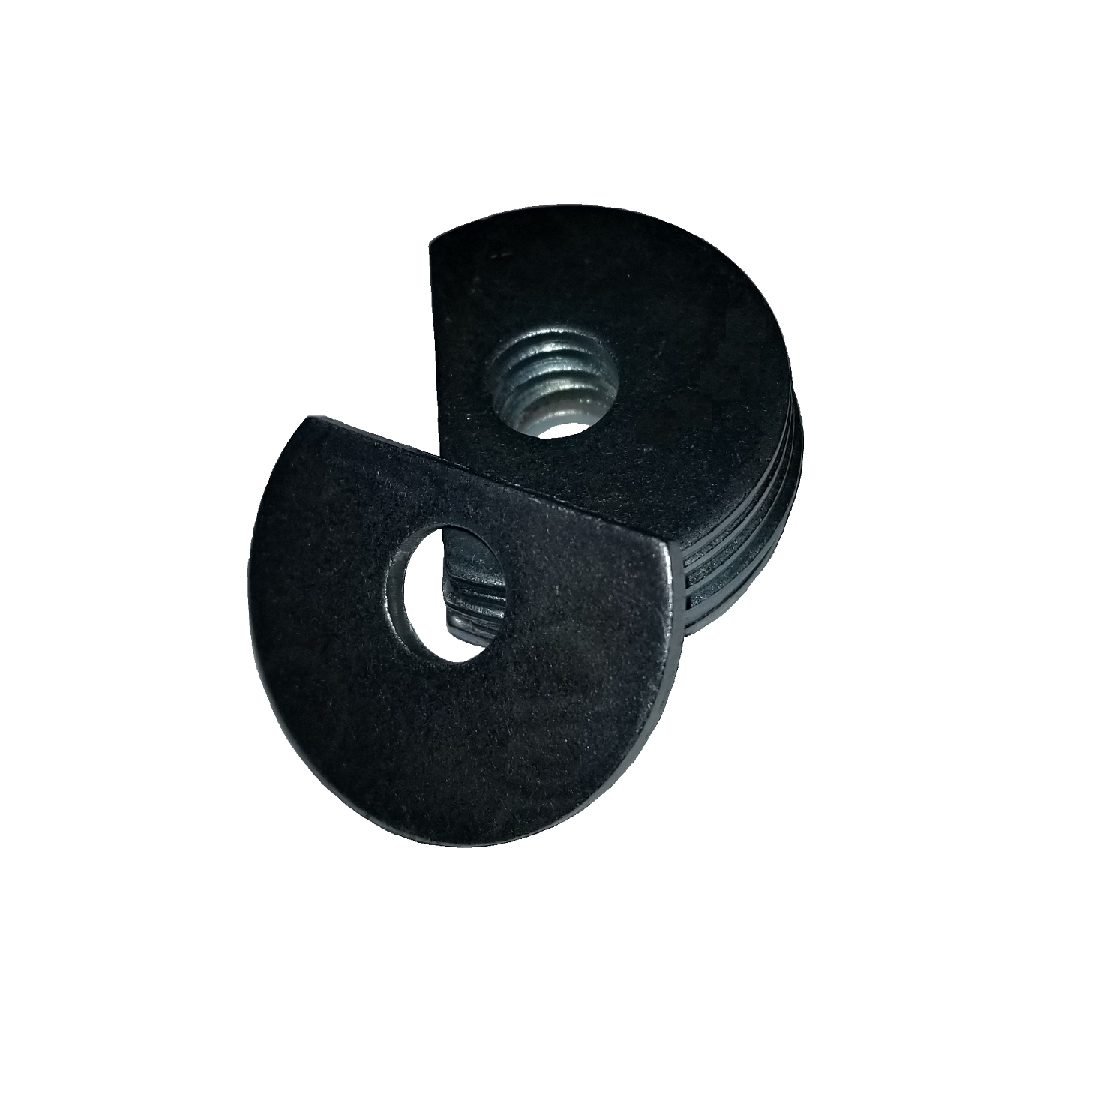 Clipped OD Washer - 0.656 ID, 2.500 OD, 0.250 Thick, Low Carbon Steel - Soft, Zinc & Clear